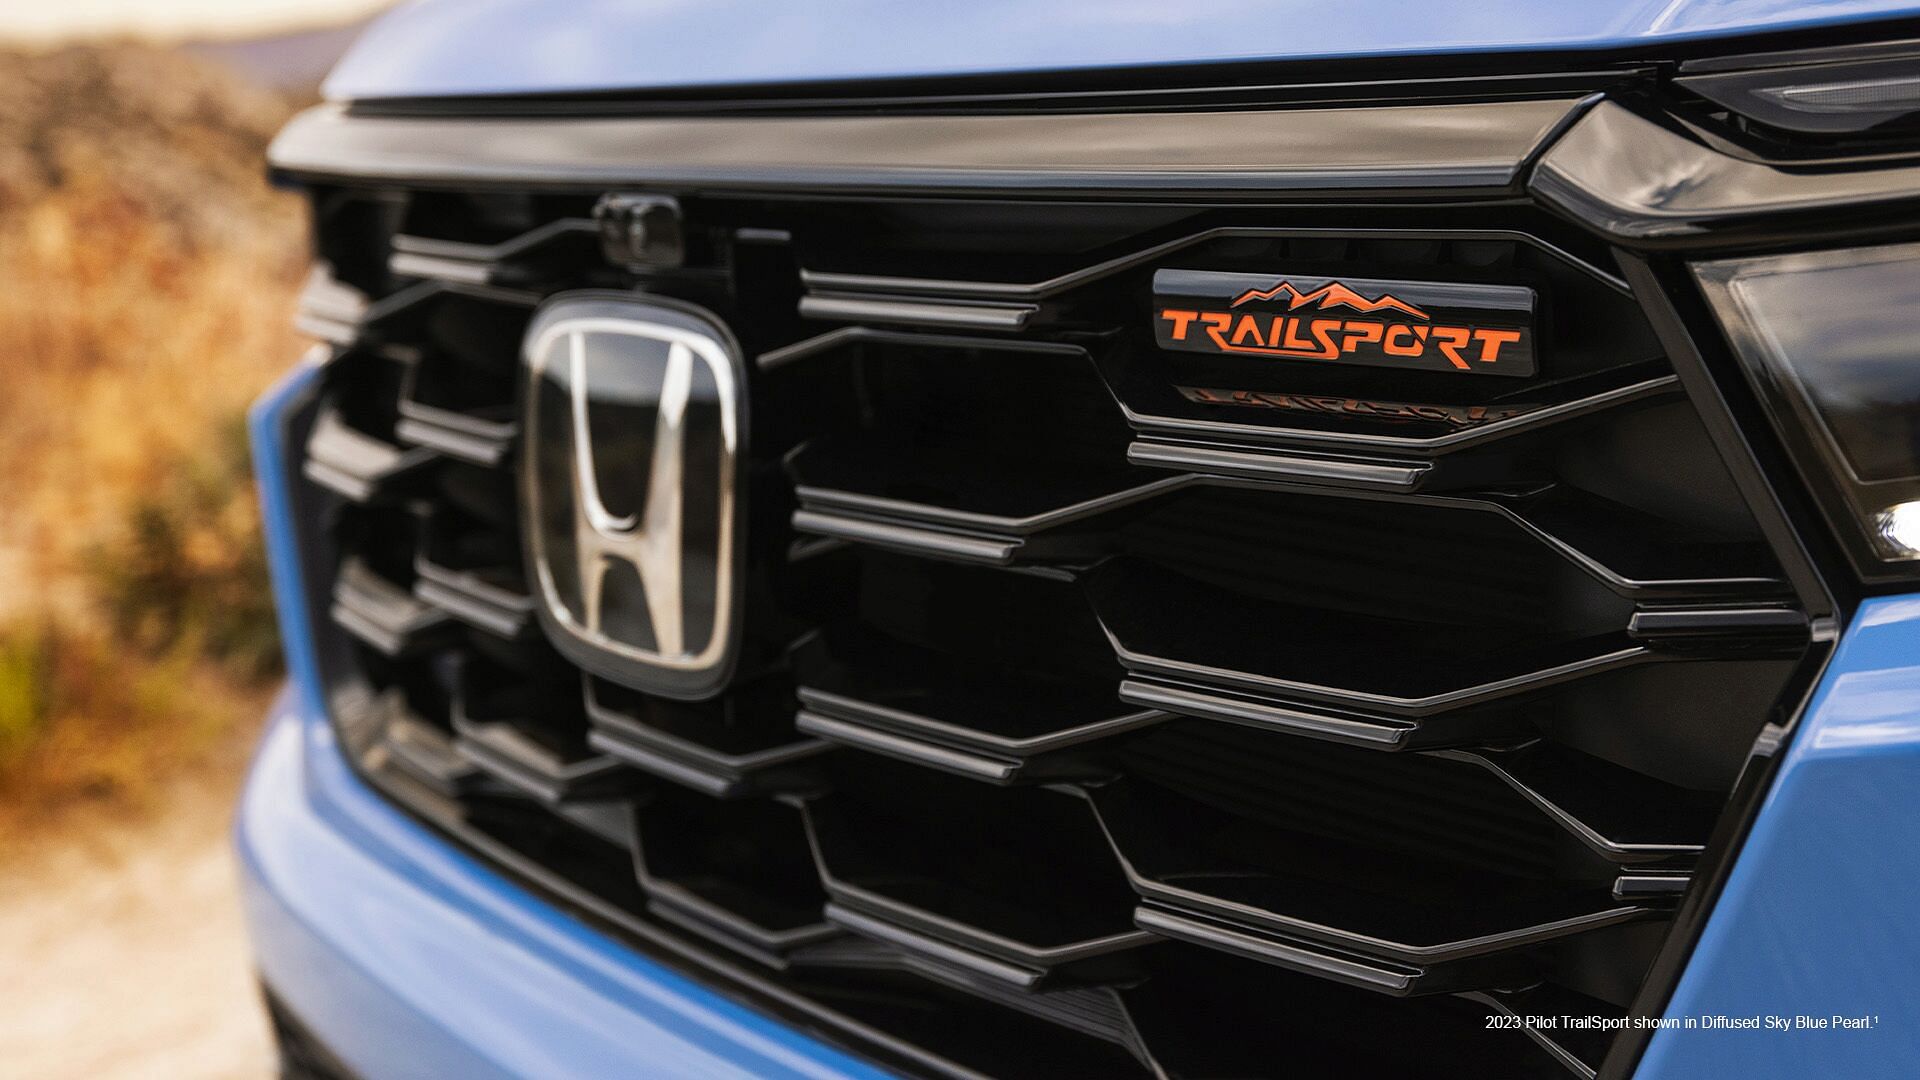 front grille of 2023 Honda Pilot TrailSport shown in Diffused Sky Blue Pearl